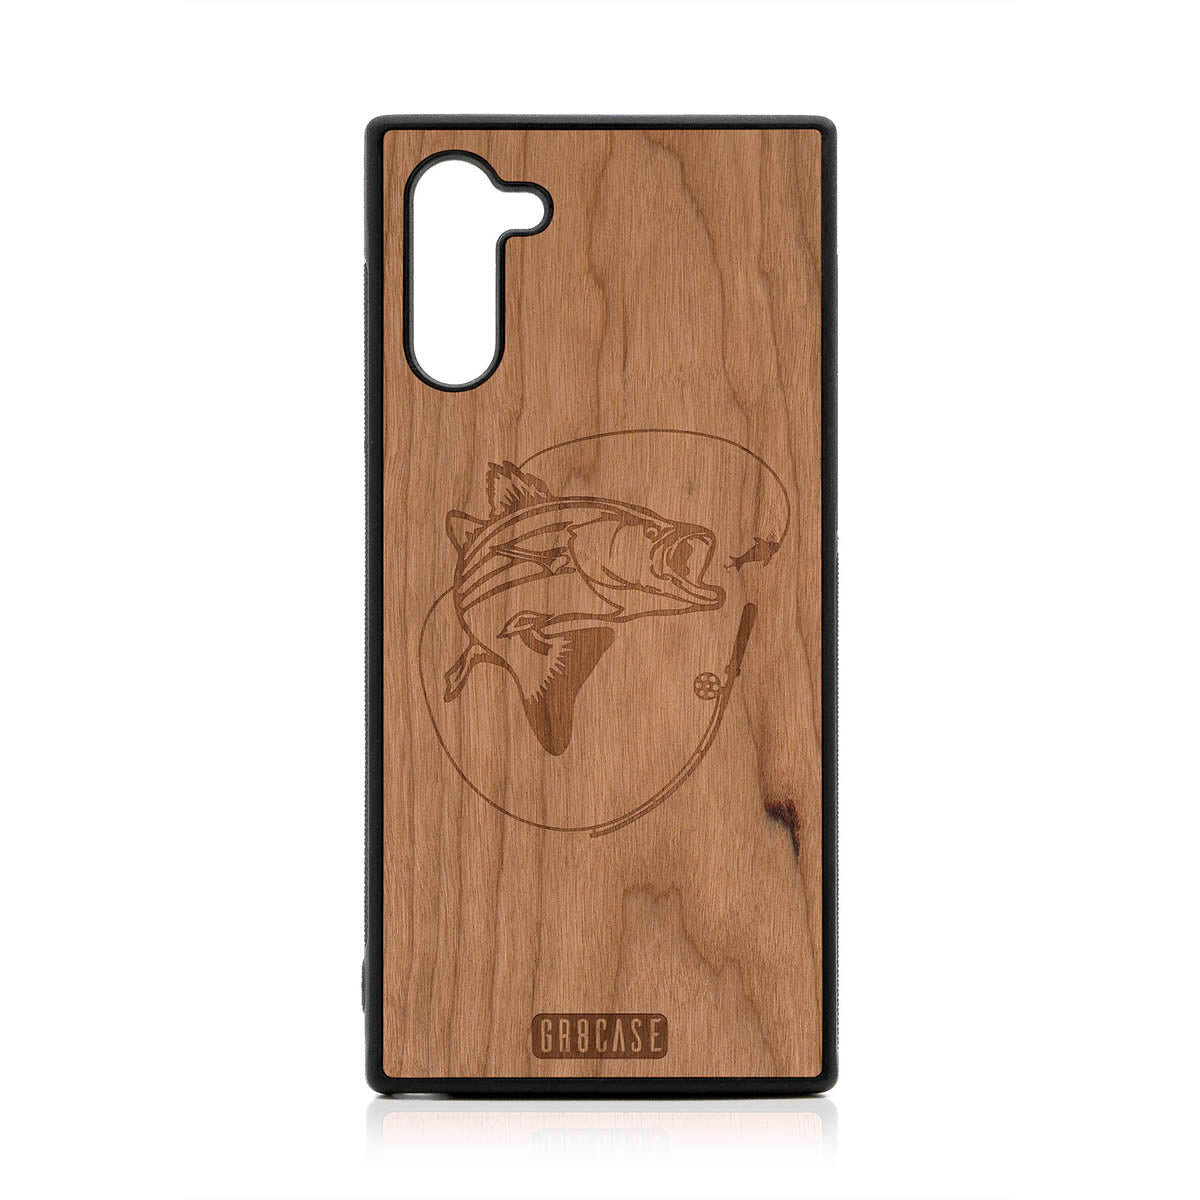 Fish and Reel Design Wood Case For Samsung Galaxy Note 10 by GR8CASE